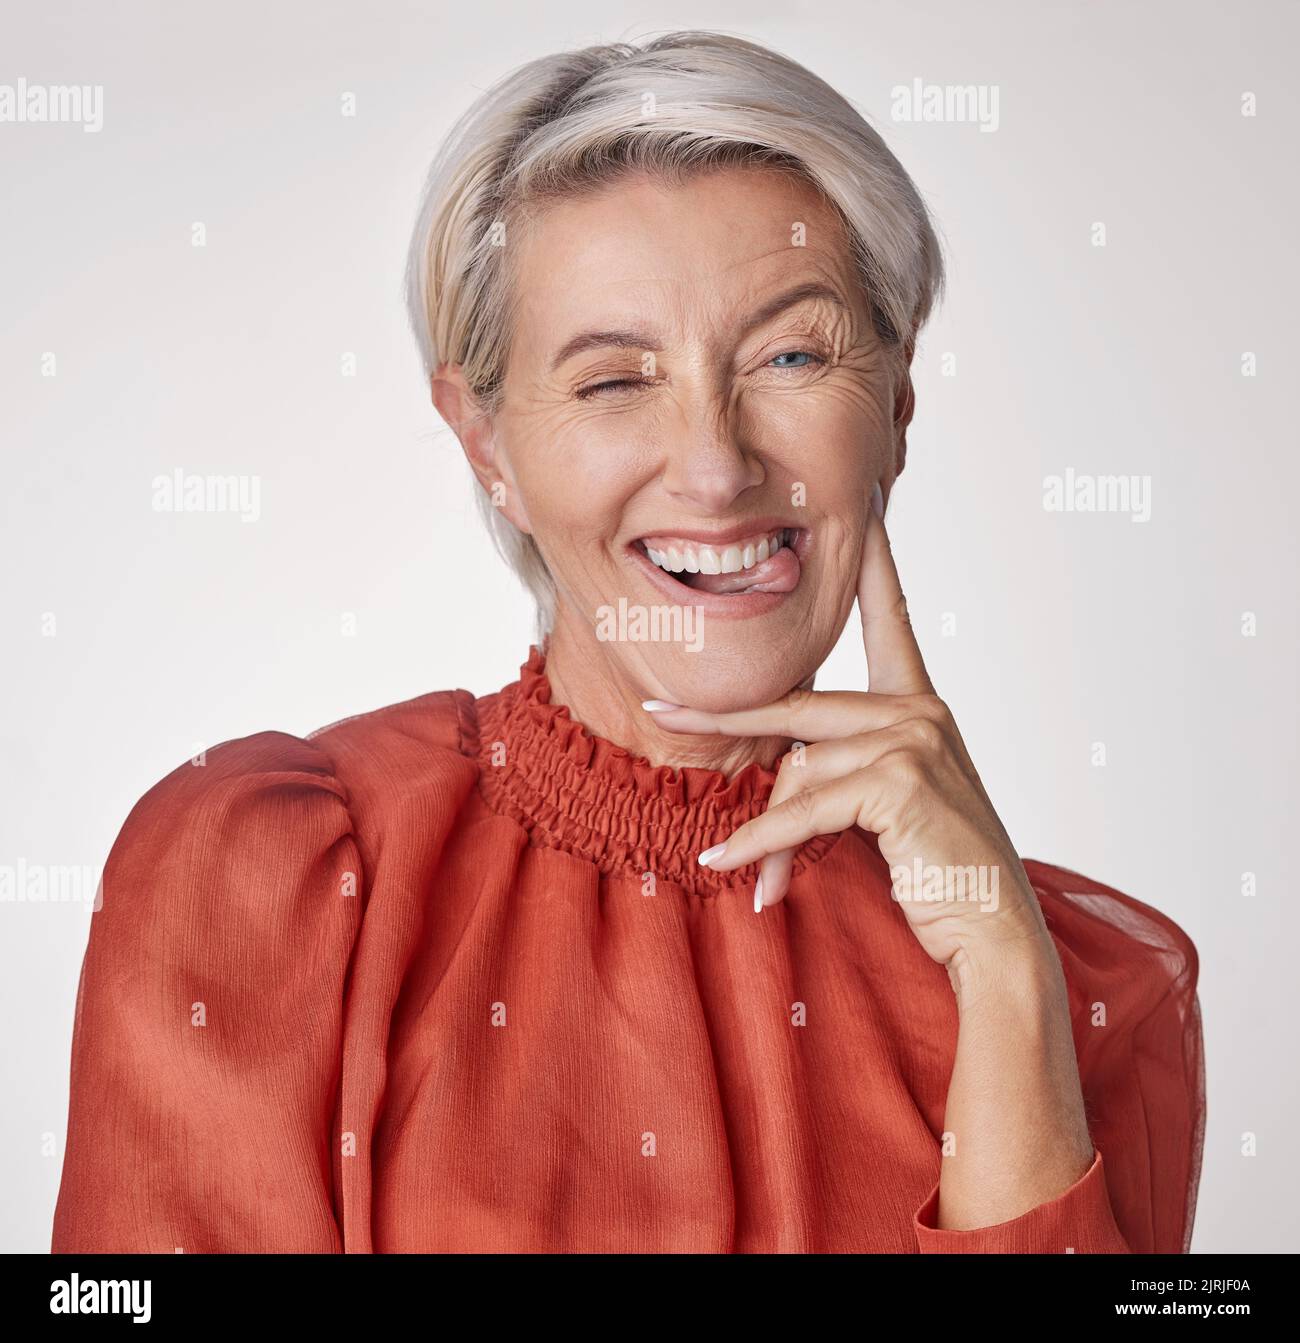 Comic portrait, quirky model or playful mature woman on gray studio background with funny facial expression, tongue or happy wink face. Silly, classy Stock Photo